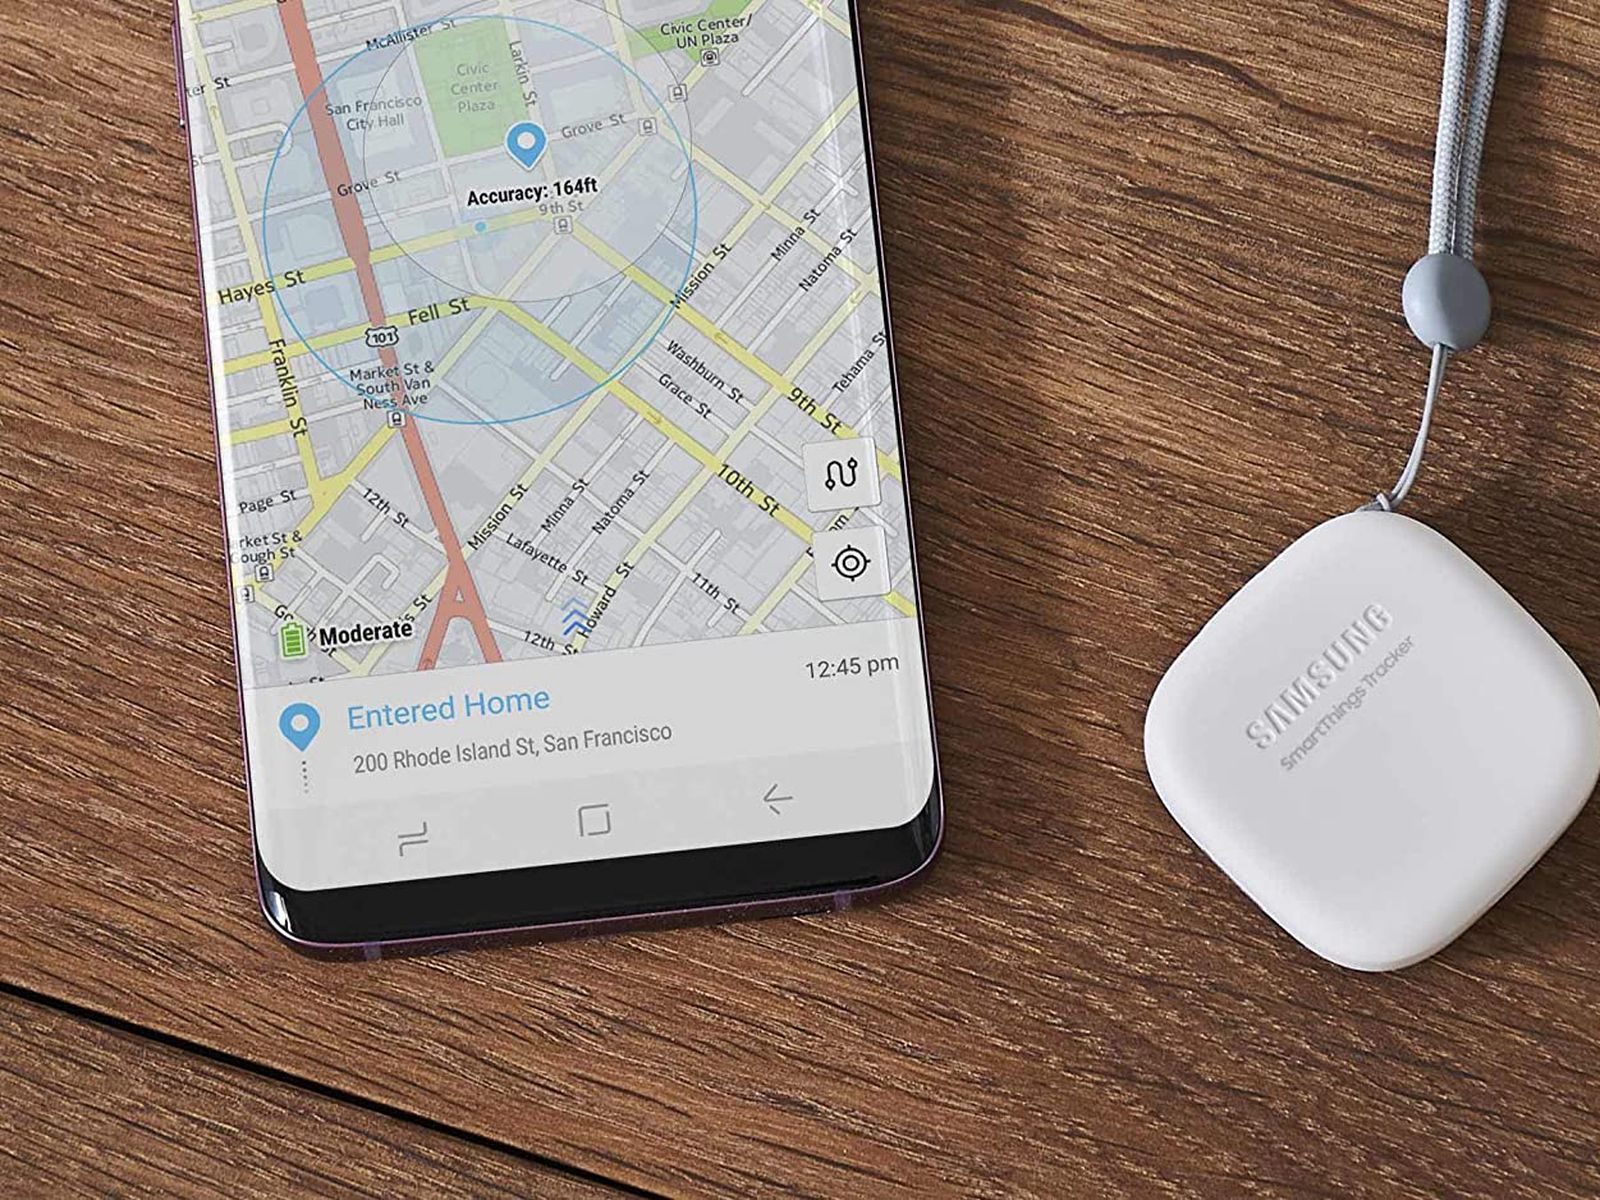 Samsung's SmartThings app can now detect if someone is tracking you